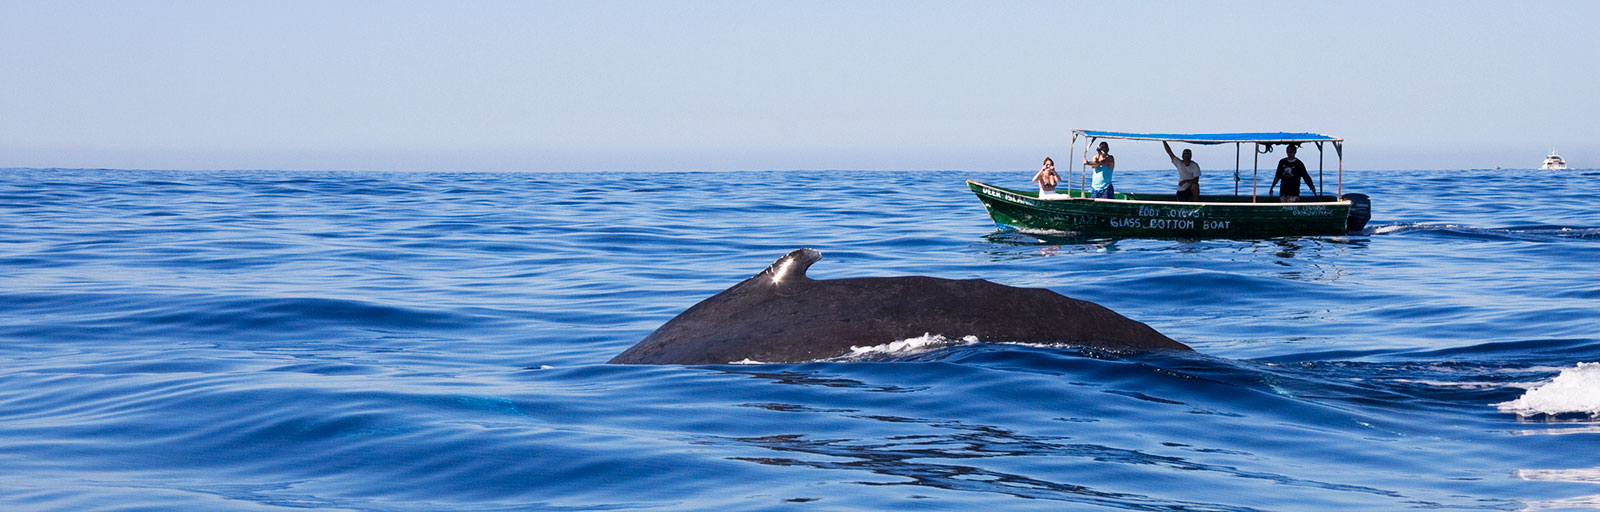 Best Yoga Retreats in Mexico: Whale Watching Yoga Retreat